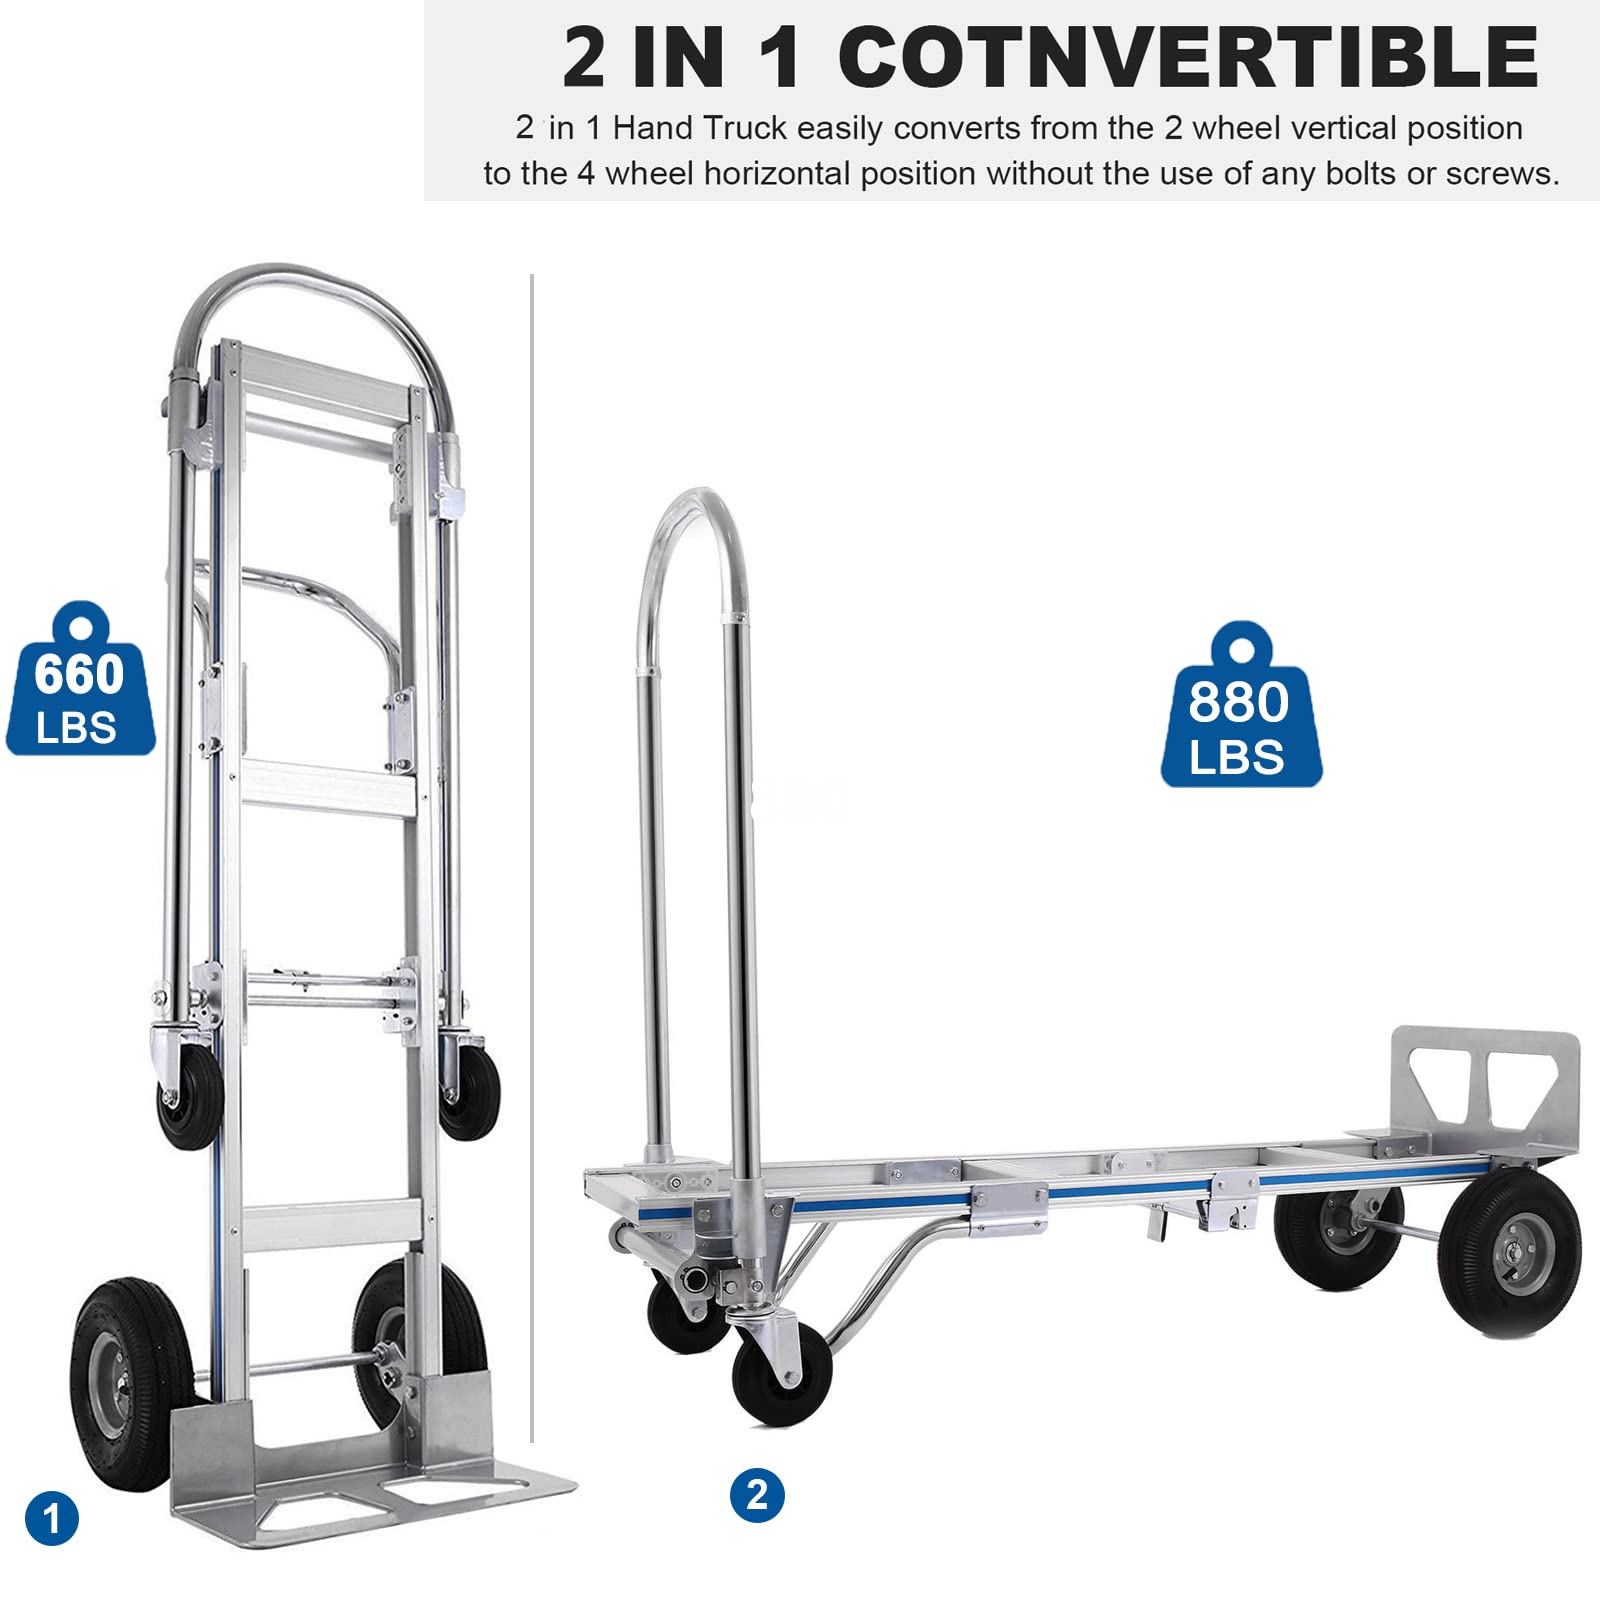 TOPDEEP Heavy Duty Aluminum Hand Truck, Industrial Convertible Hand Truck Dolly Large Size, Utility Cart Converts from Hand Truck to Platform Cart with 10" Hi Tech Rubber Wheels